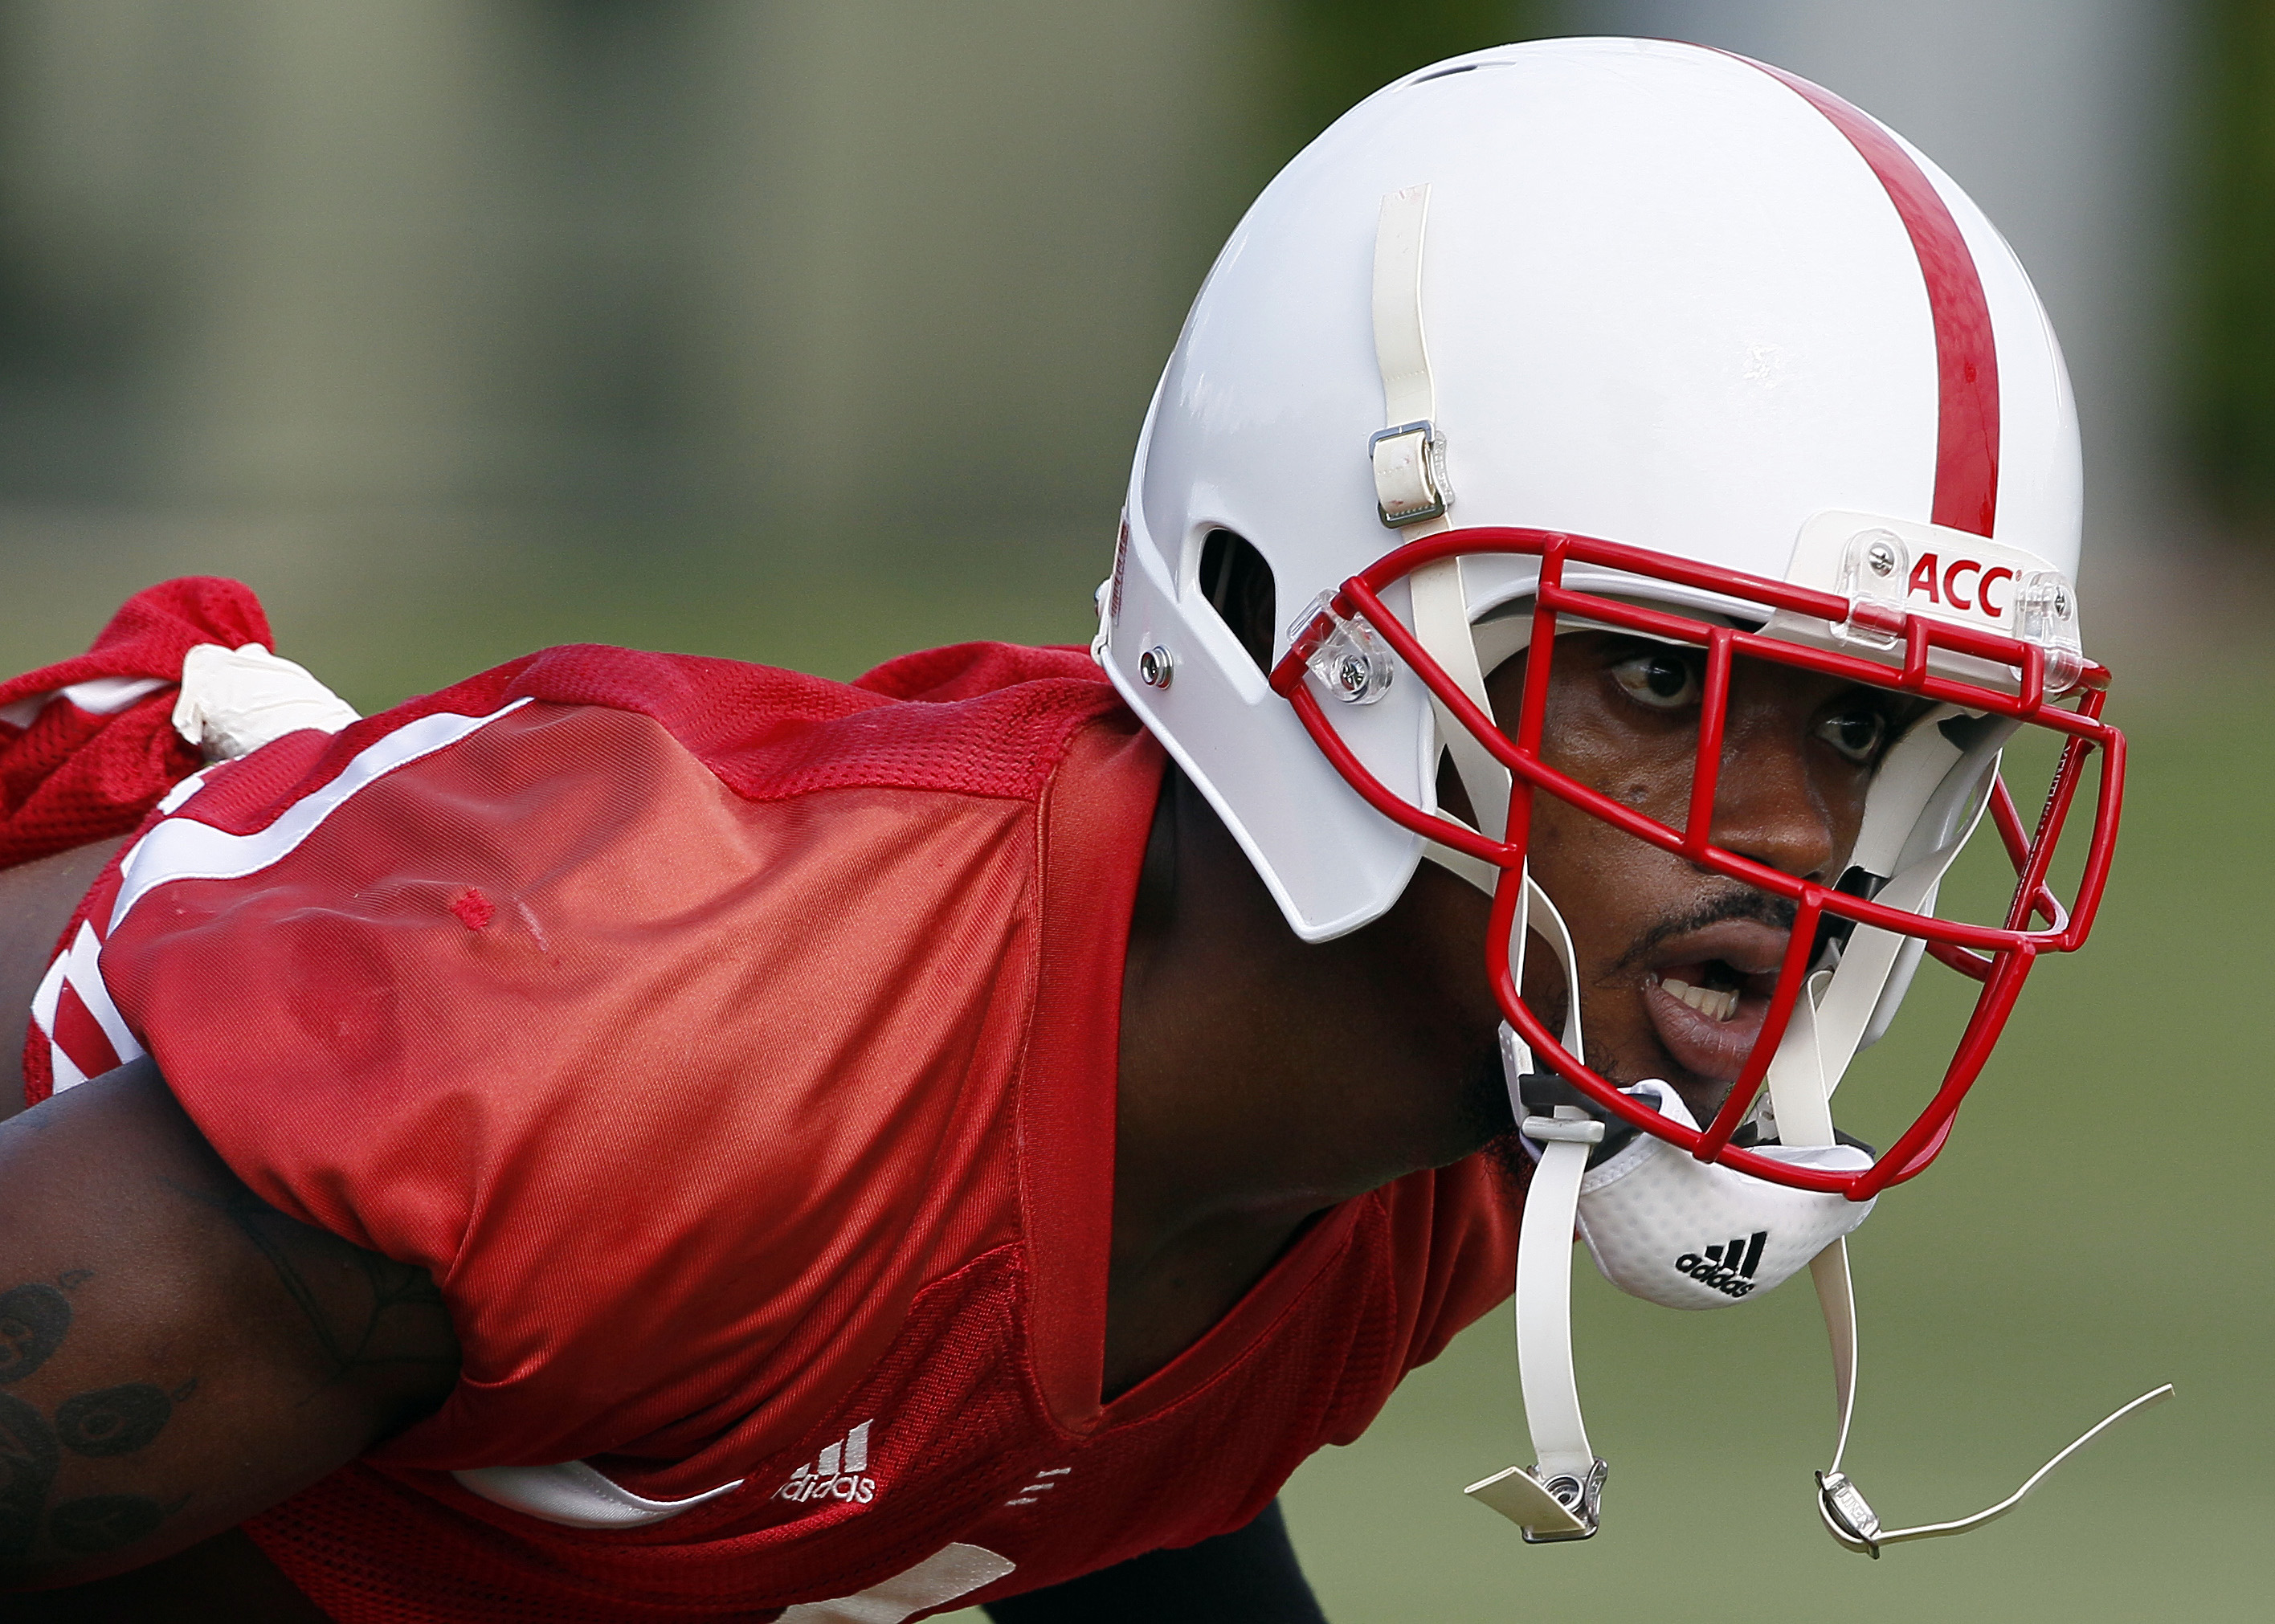 N.C. State's David Amerson a welcome challenge for UT